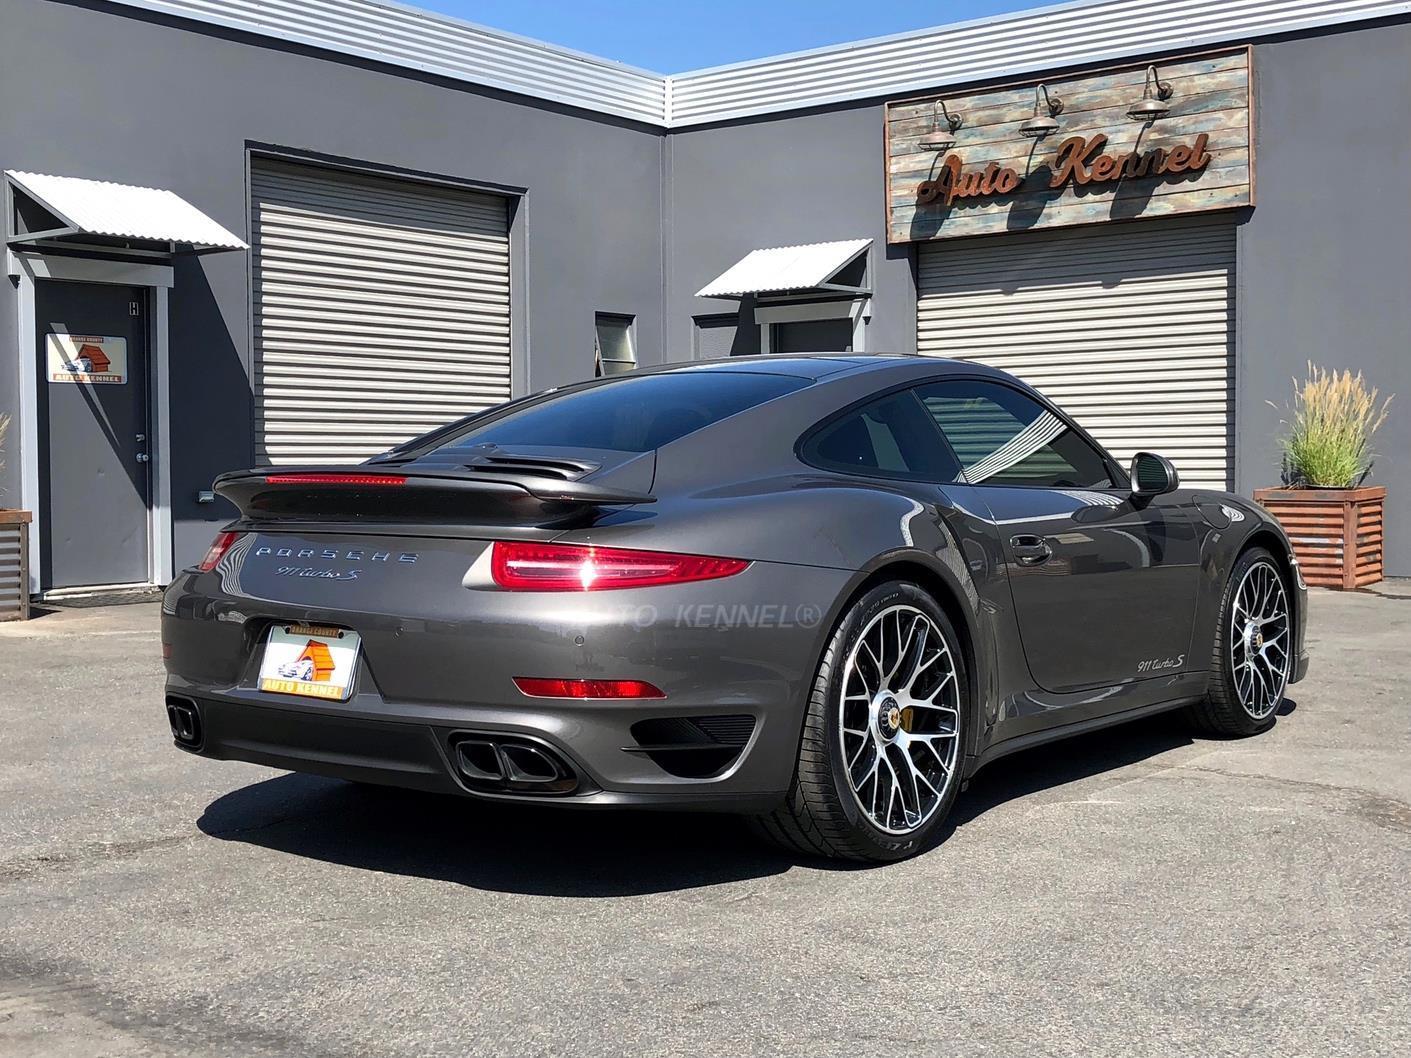 14 Porsche 911 Turbo S 14 Porsche 911 991 Turbo S Coupe Agate Grey 1k Msrp Orig Paint 17 18 Is In Stock And For Sale 24carshop Com